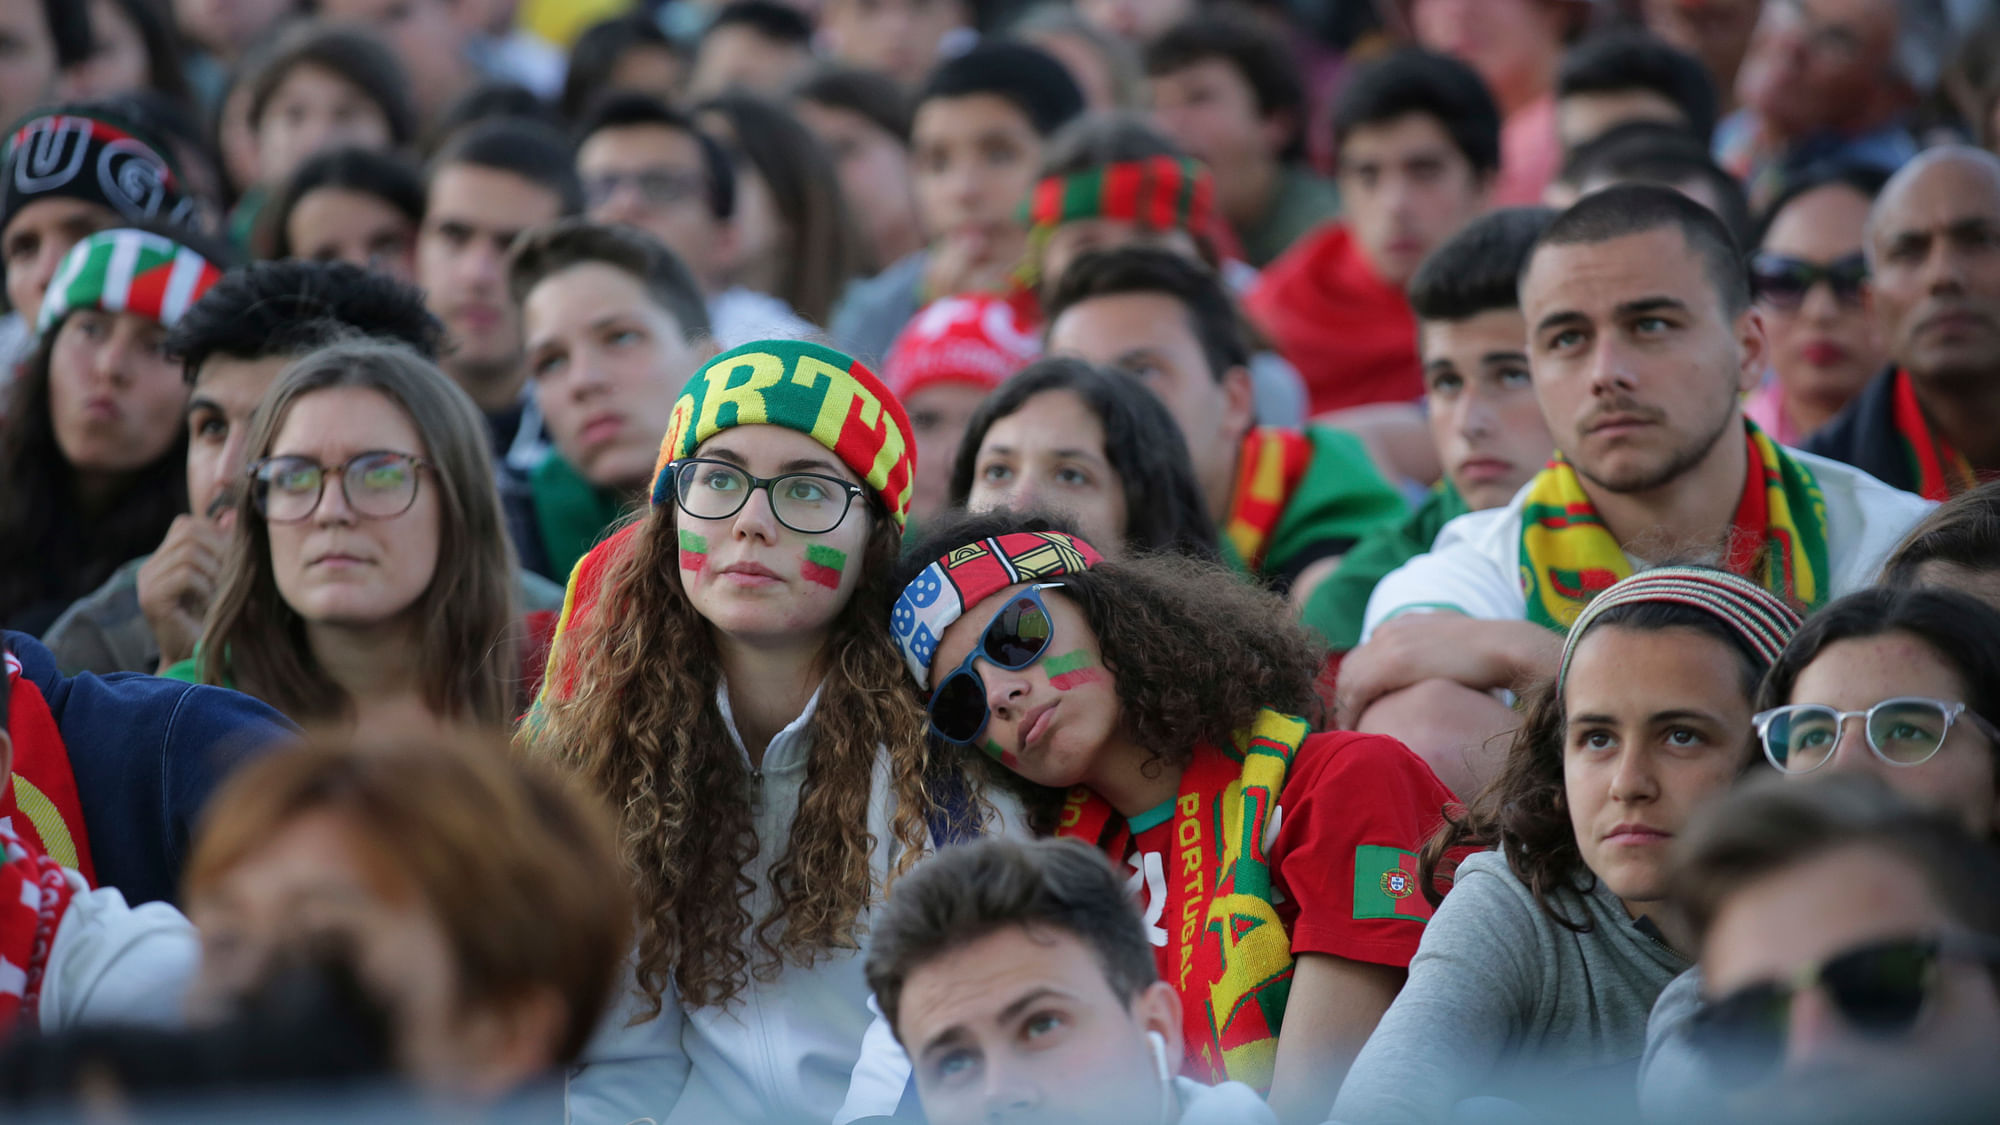 Portugal fans watch the 2018 soccer World Cup group B match between Portugal and Spain being shown on a video screen in Lisbon’s Comercio square, Friday, June 15 2018.&nbsp;